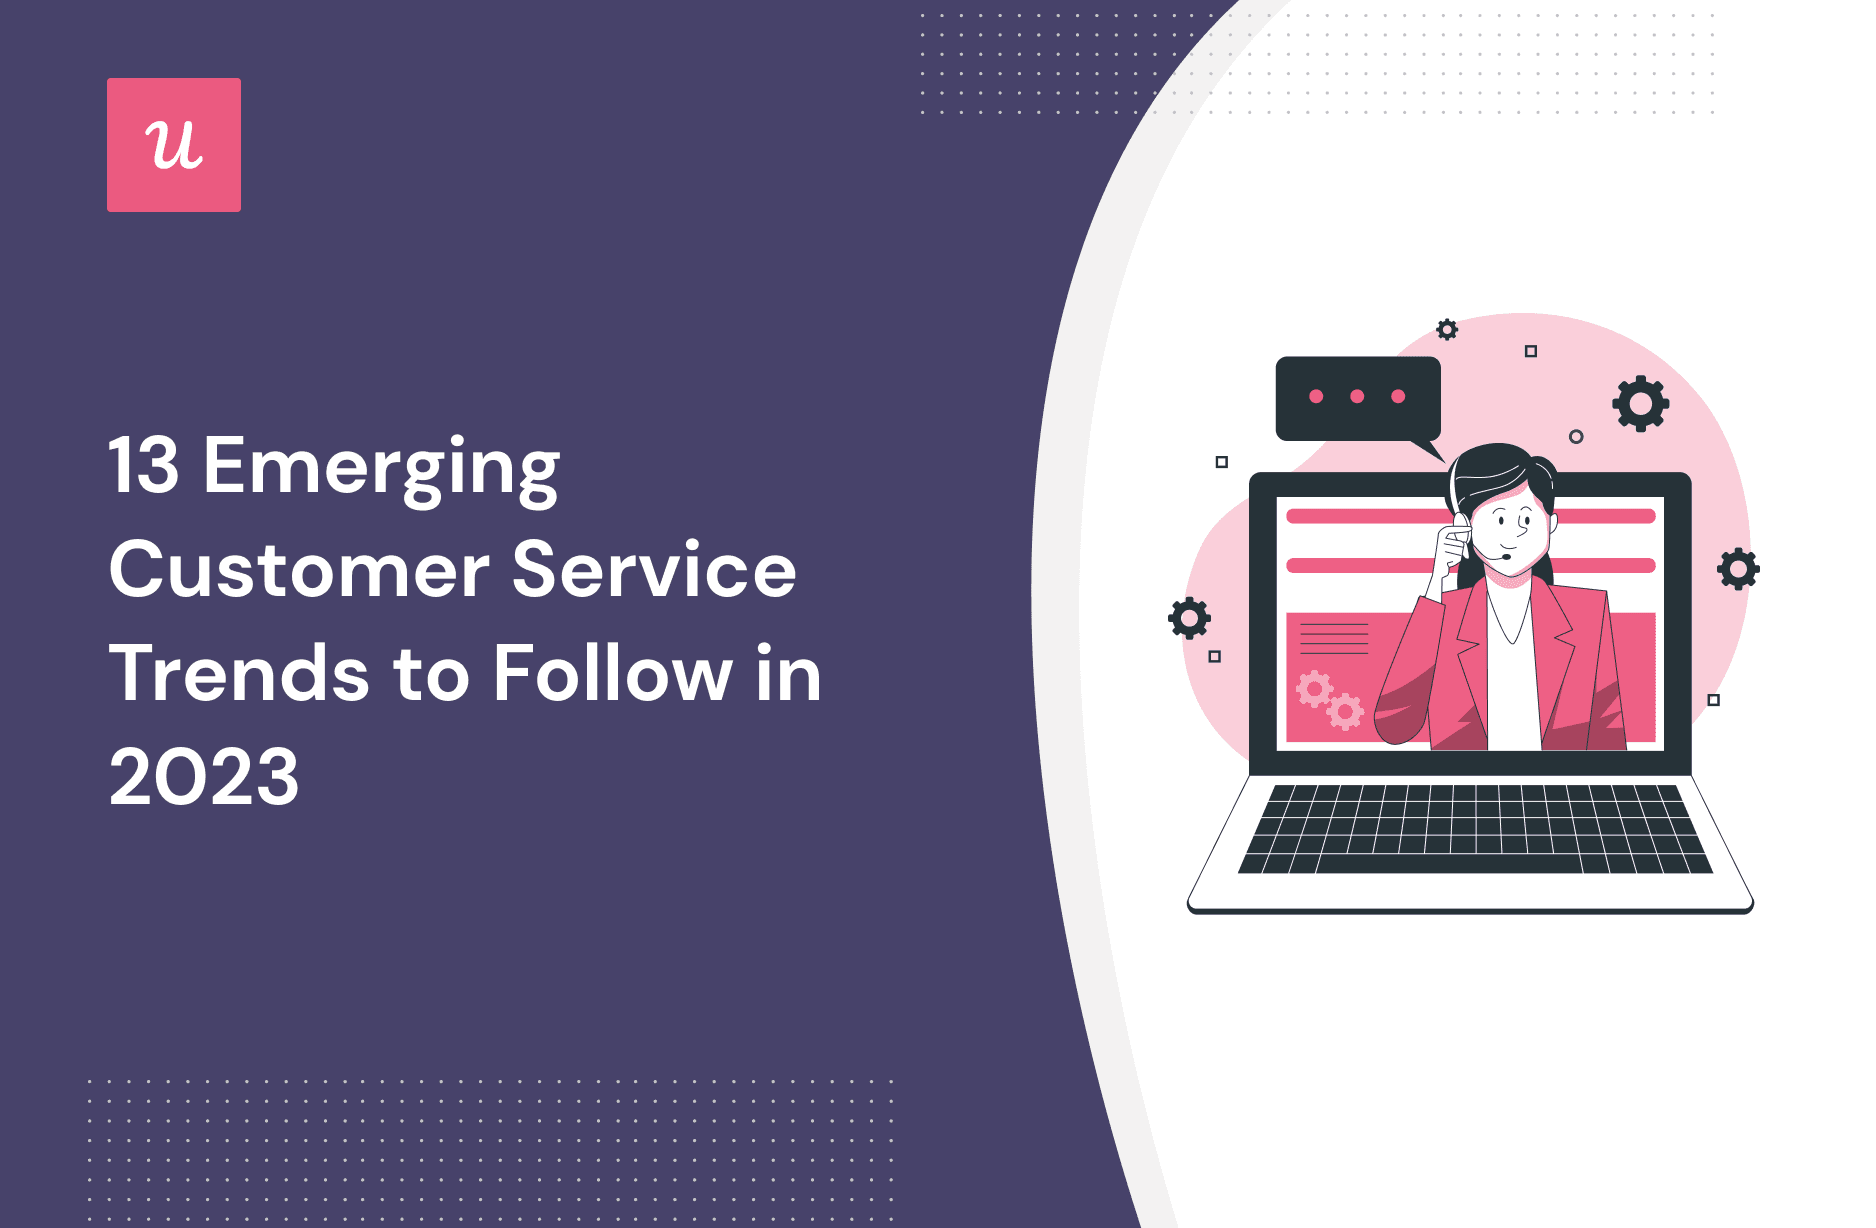 13 Emerging Customer Service Trends to Follow in 2023 cover